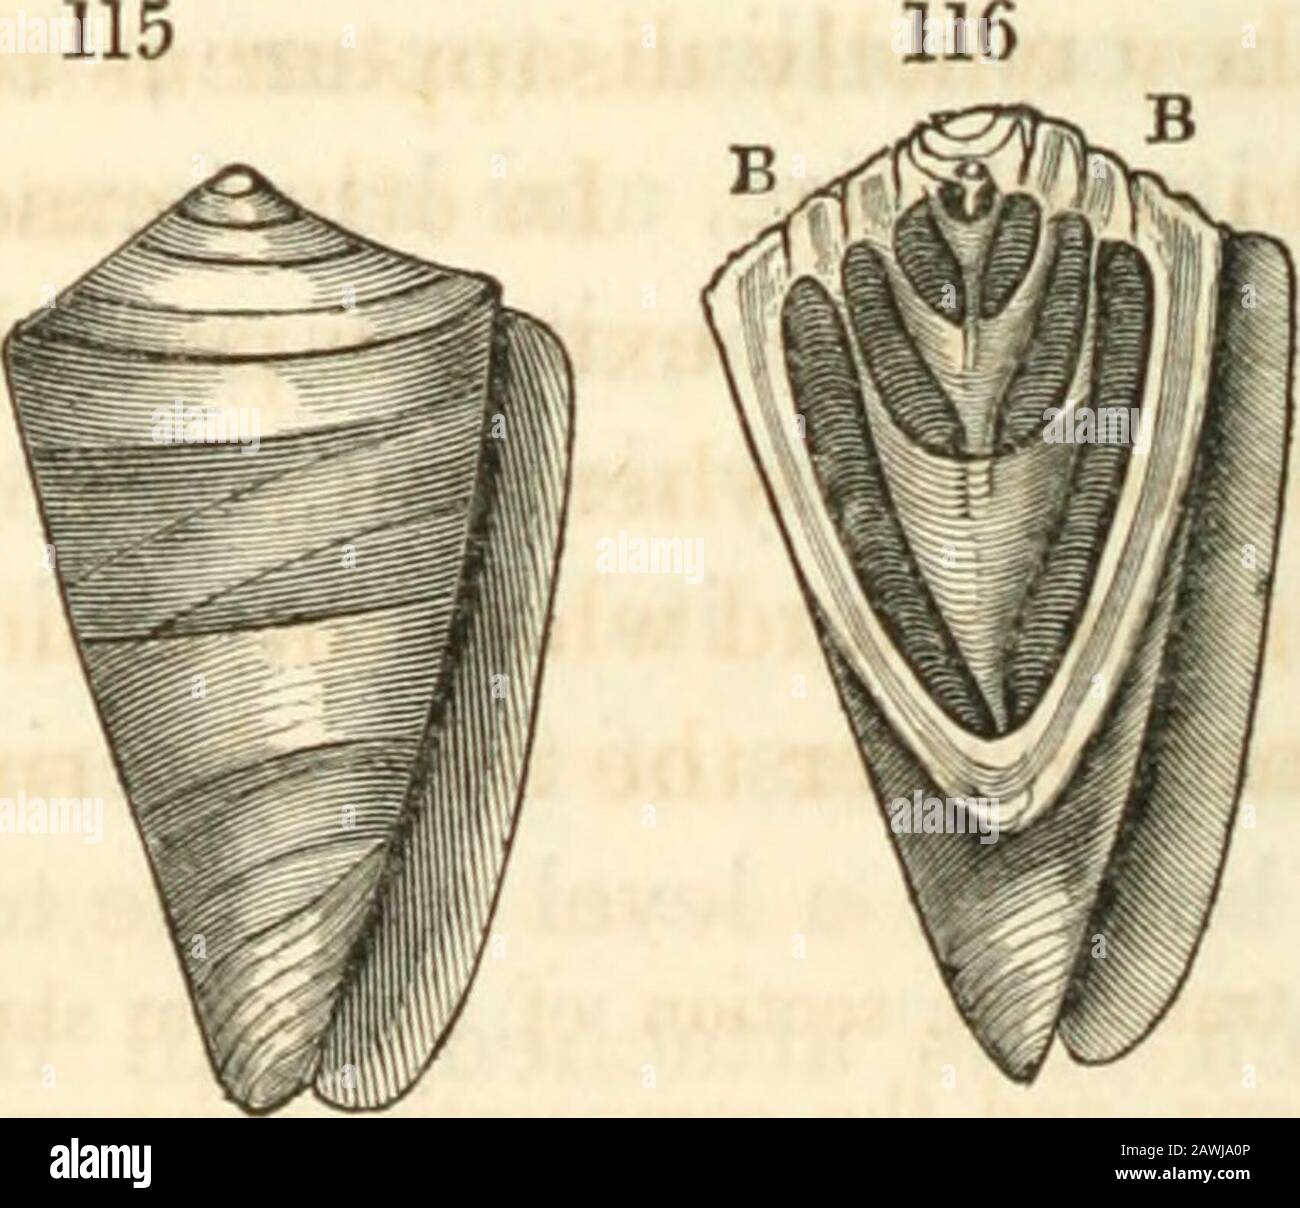 Animal and vegetable physiology, considered with reference to natural theology, by Peter Mark Roget .. . topof the coral to which it is attached, until the * As in the genera Turritella, Terebra, Cerithium, and FaSciolaria. 250 THE MECHANICAL FUNCTIONS. original shell is quite buried in this vitreous sub-stance. The forms of the Cone and Olive shells are suchas to allow but a small space for the convolutionsof the body of the animal, which accordinglybecomes, in the progress of its enlargement, ex-cessively cramped. In order to obtain morespace, and at the same time lighten the shell,the whole Stock Photo